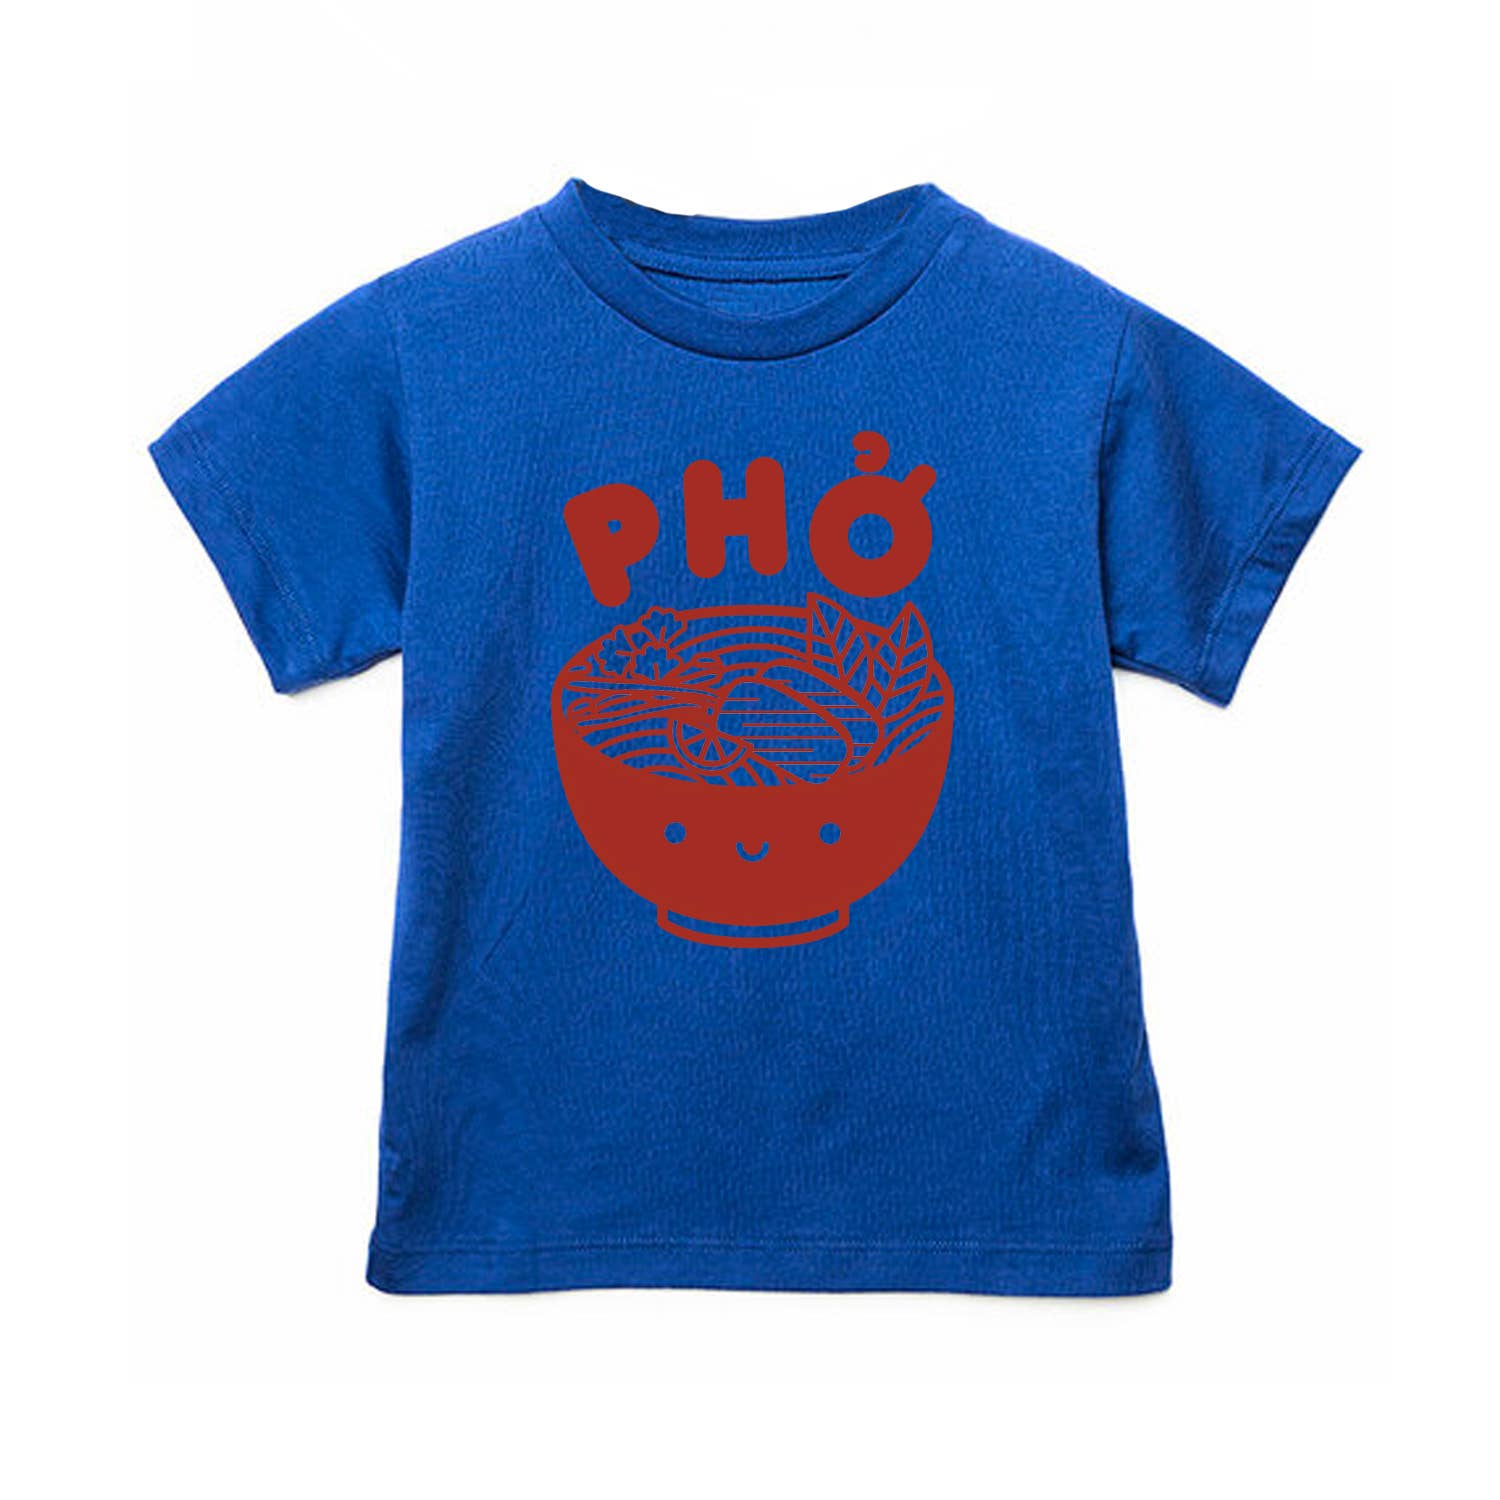 Electric blue shirt with red print of a bowl of Pho noodles and the word PHO on top.